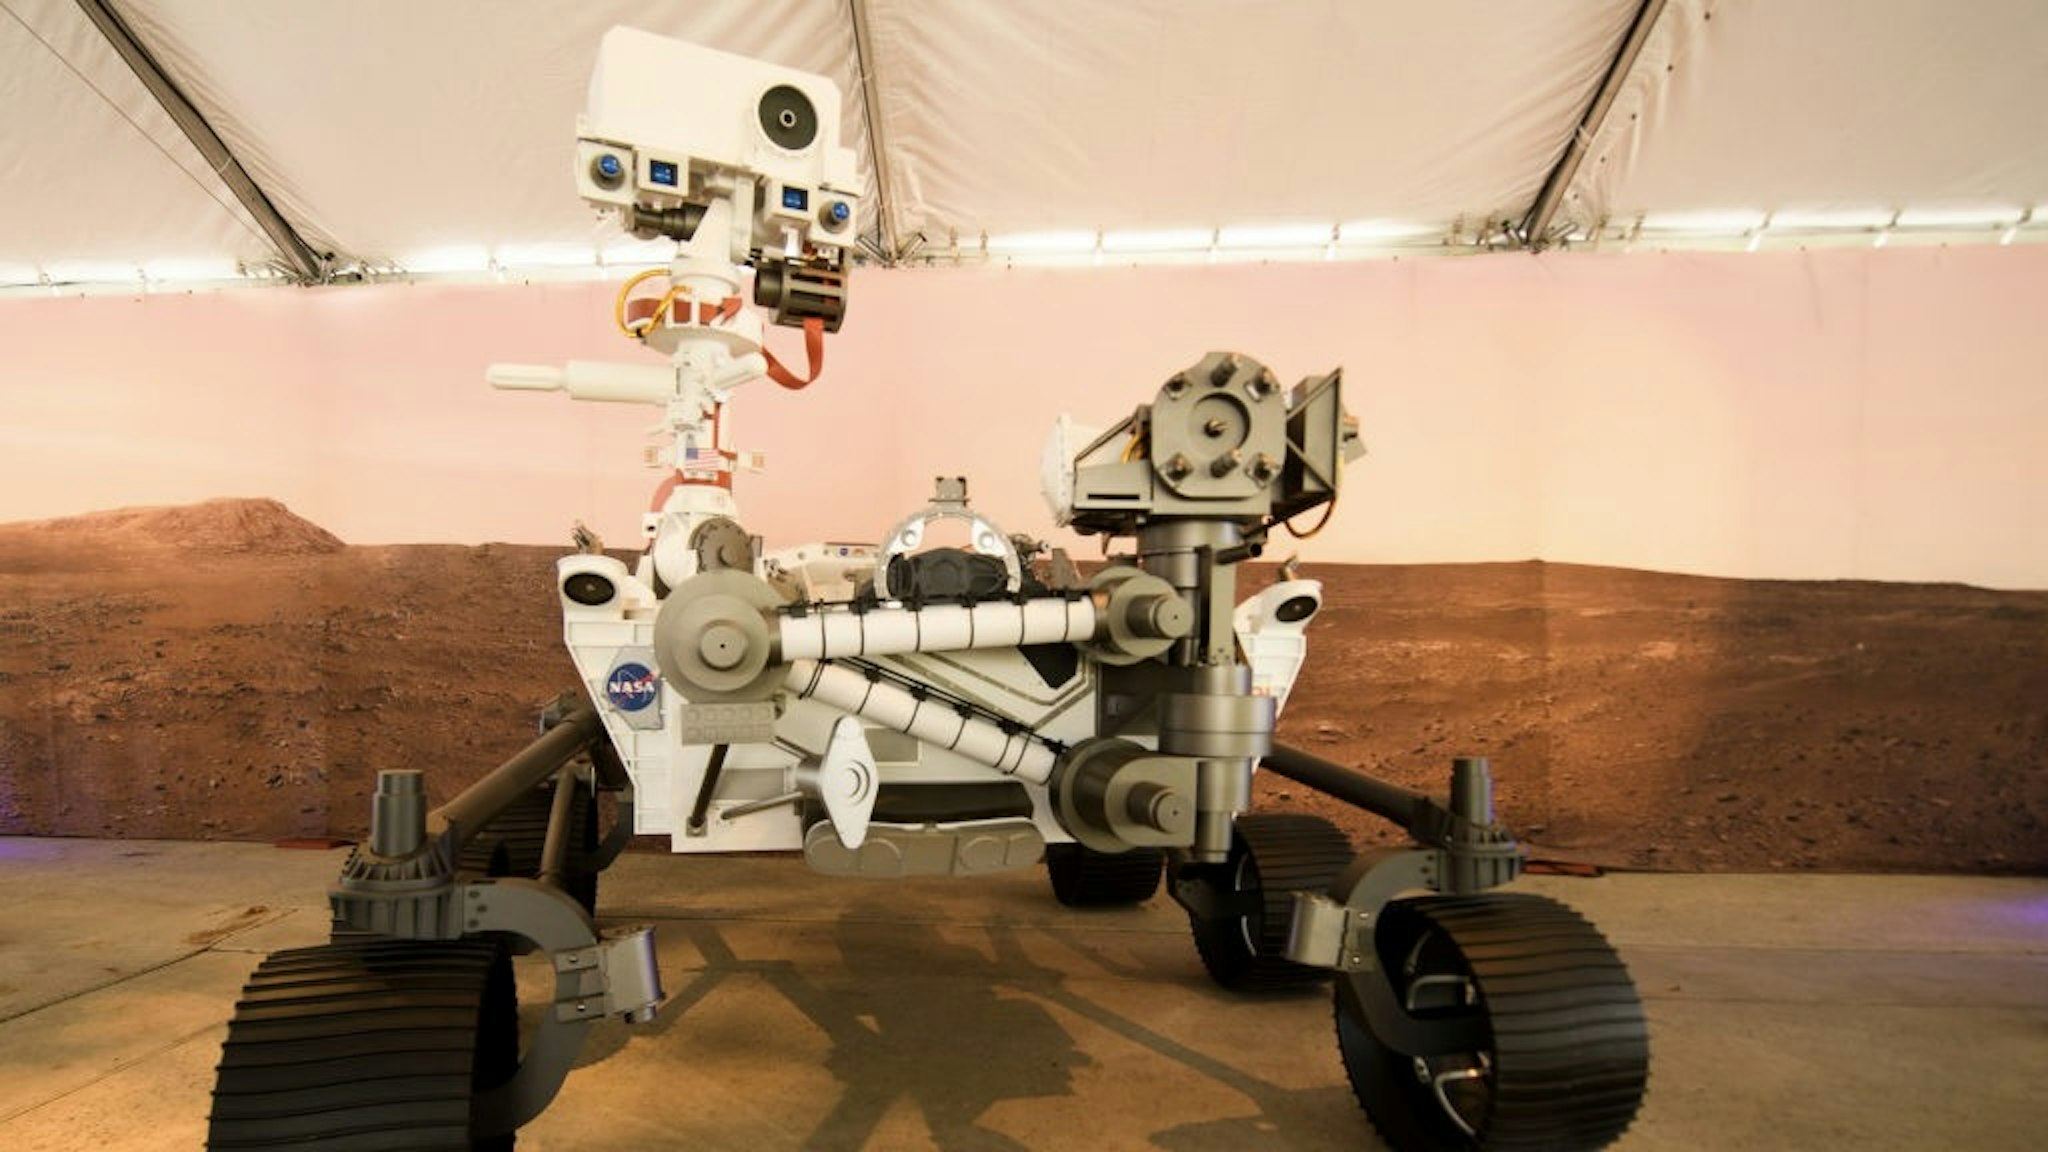 A full scale model of the Mars 2020 Perseverance rover is displayed at NASA's Jet Propulsion Laboratory (JPL) on February 16, 2021 in Pasadena, California. - The Mars exploration rover will search for signs of ancient microbial life and collect rock samples for future return to Earth to study the red planet's geology and climate, paving the way for human exploration. Perseverance also carries the experimental Ingenuity Mars Helicopter - which will attempt the first powered, controlled flight on another planet. (Photo by Patrick T. FALLON / AFP) (Photo by PATRICK T. FALLON/AFP via Getty Images)